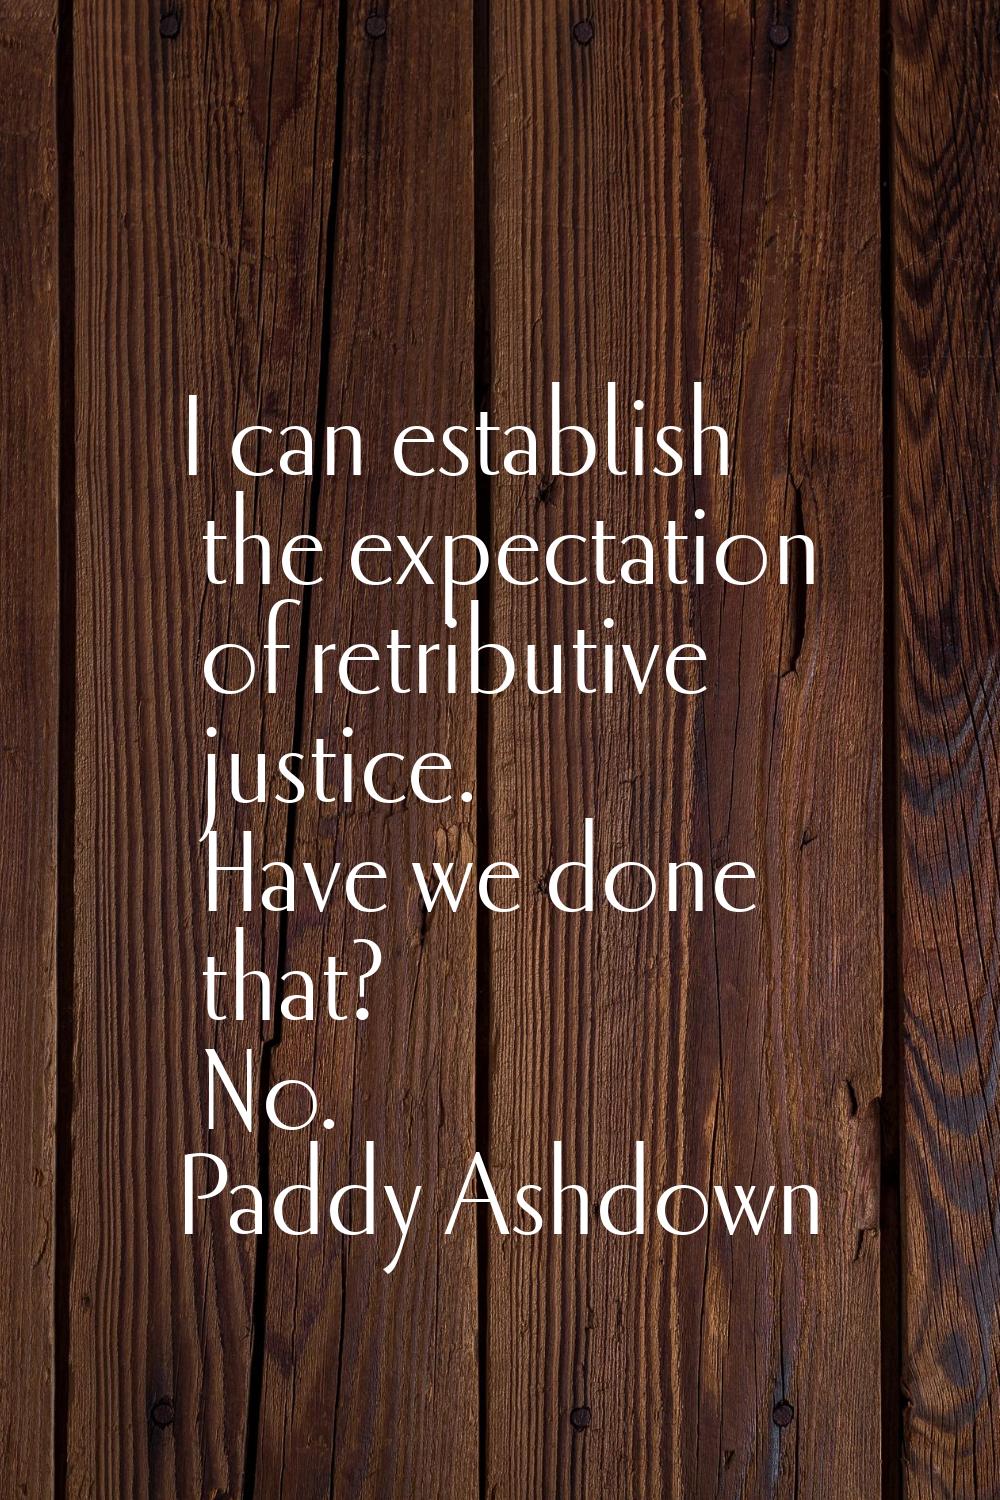 I can establish the expectation of retributive justice. Have we done that? No.